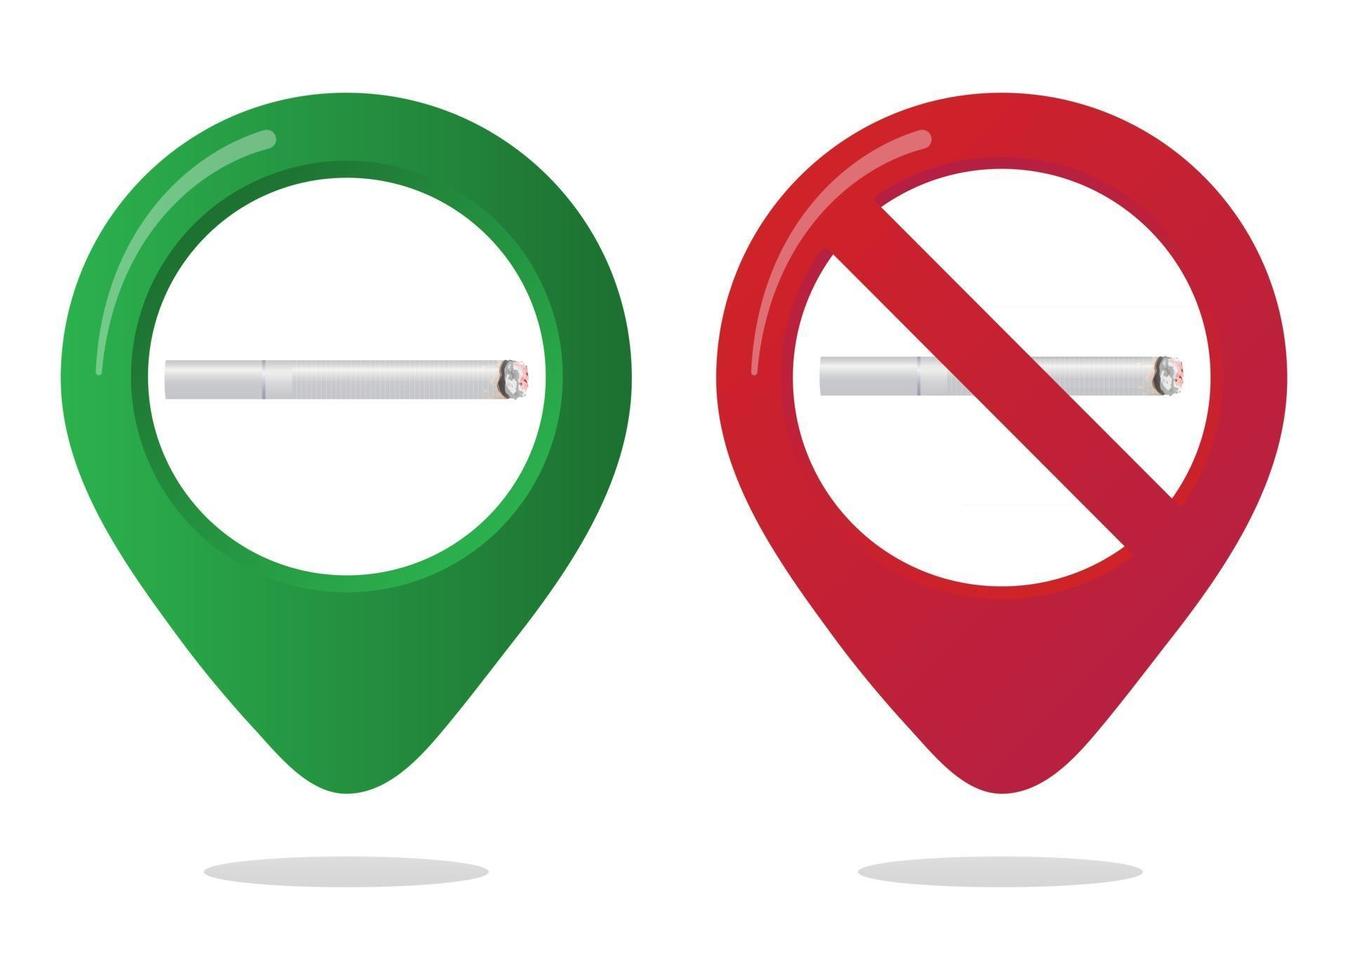 No smoking and smoking area marker map pin icon sign set with flat design gradient styled cigarette in the forbidden red circle. Symbol of the smoking area in the map apps isolated on white background vector